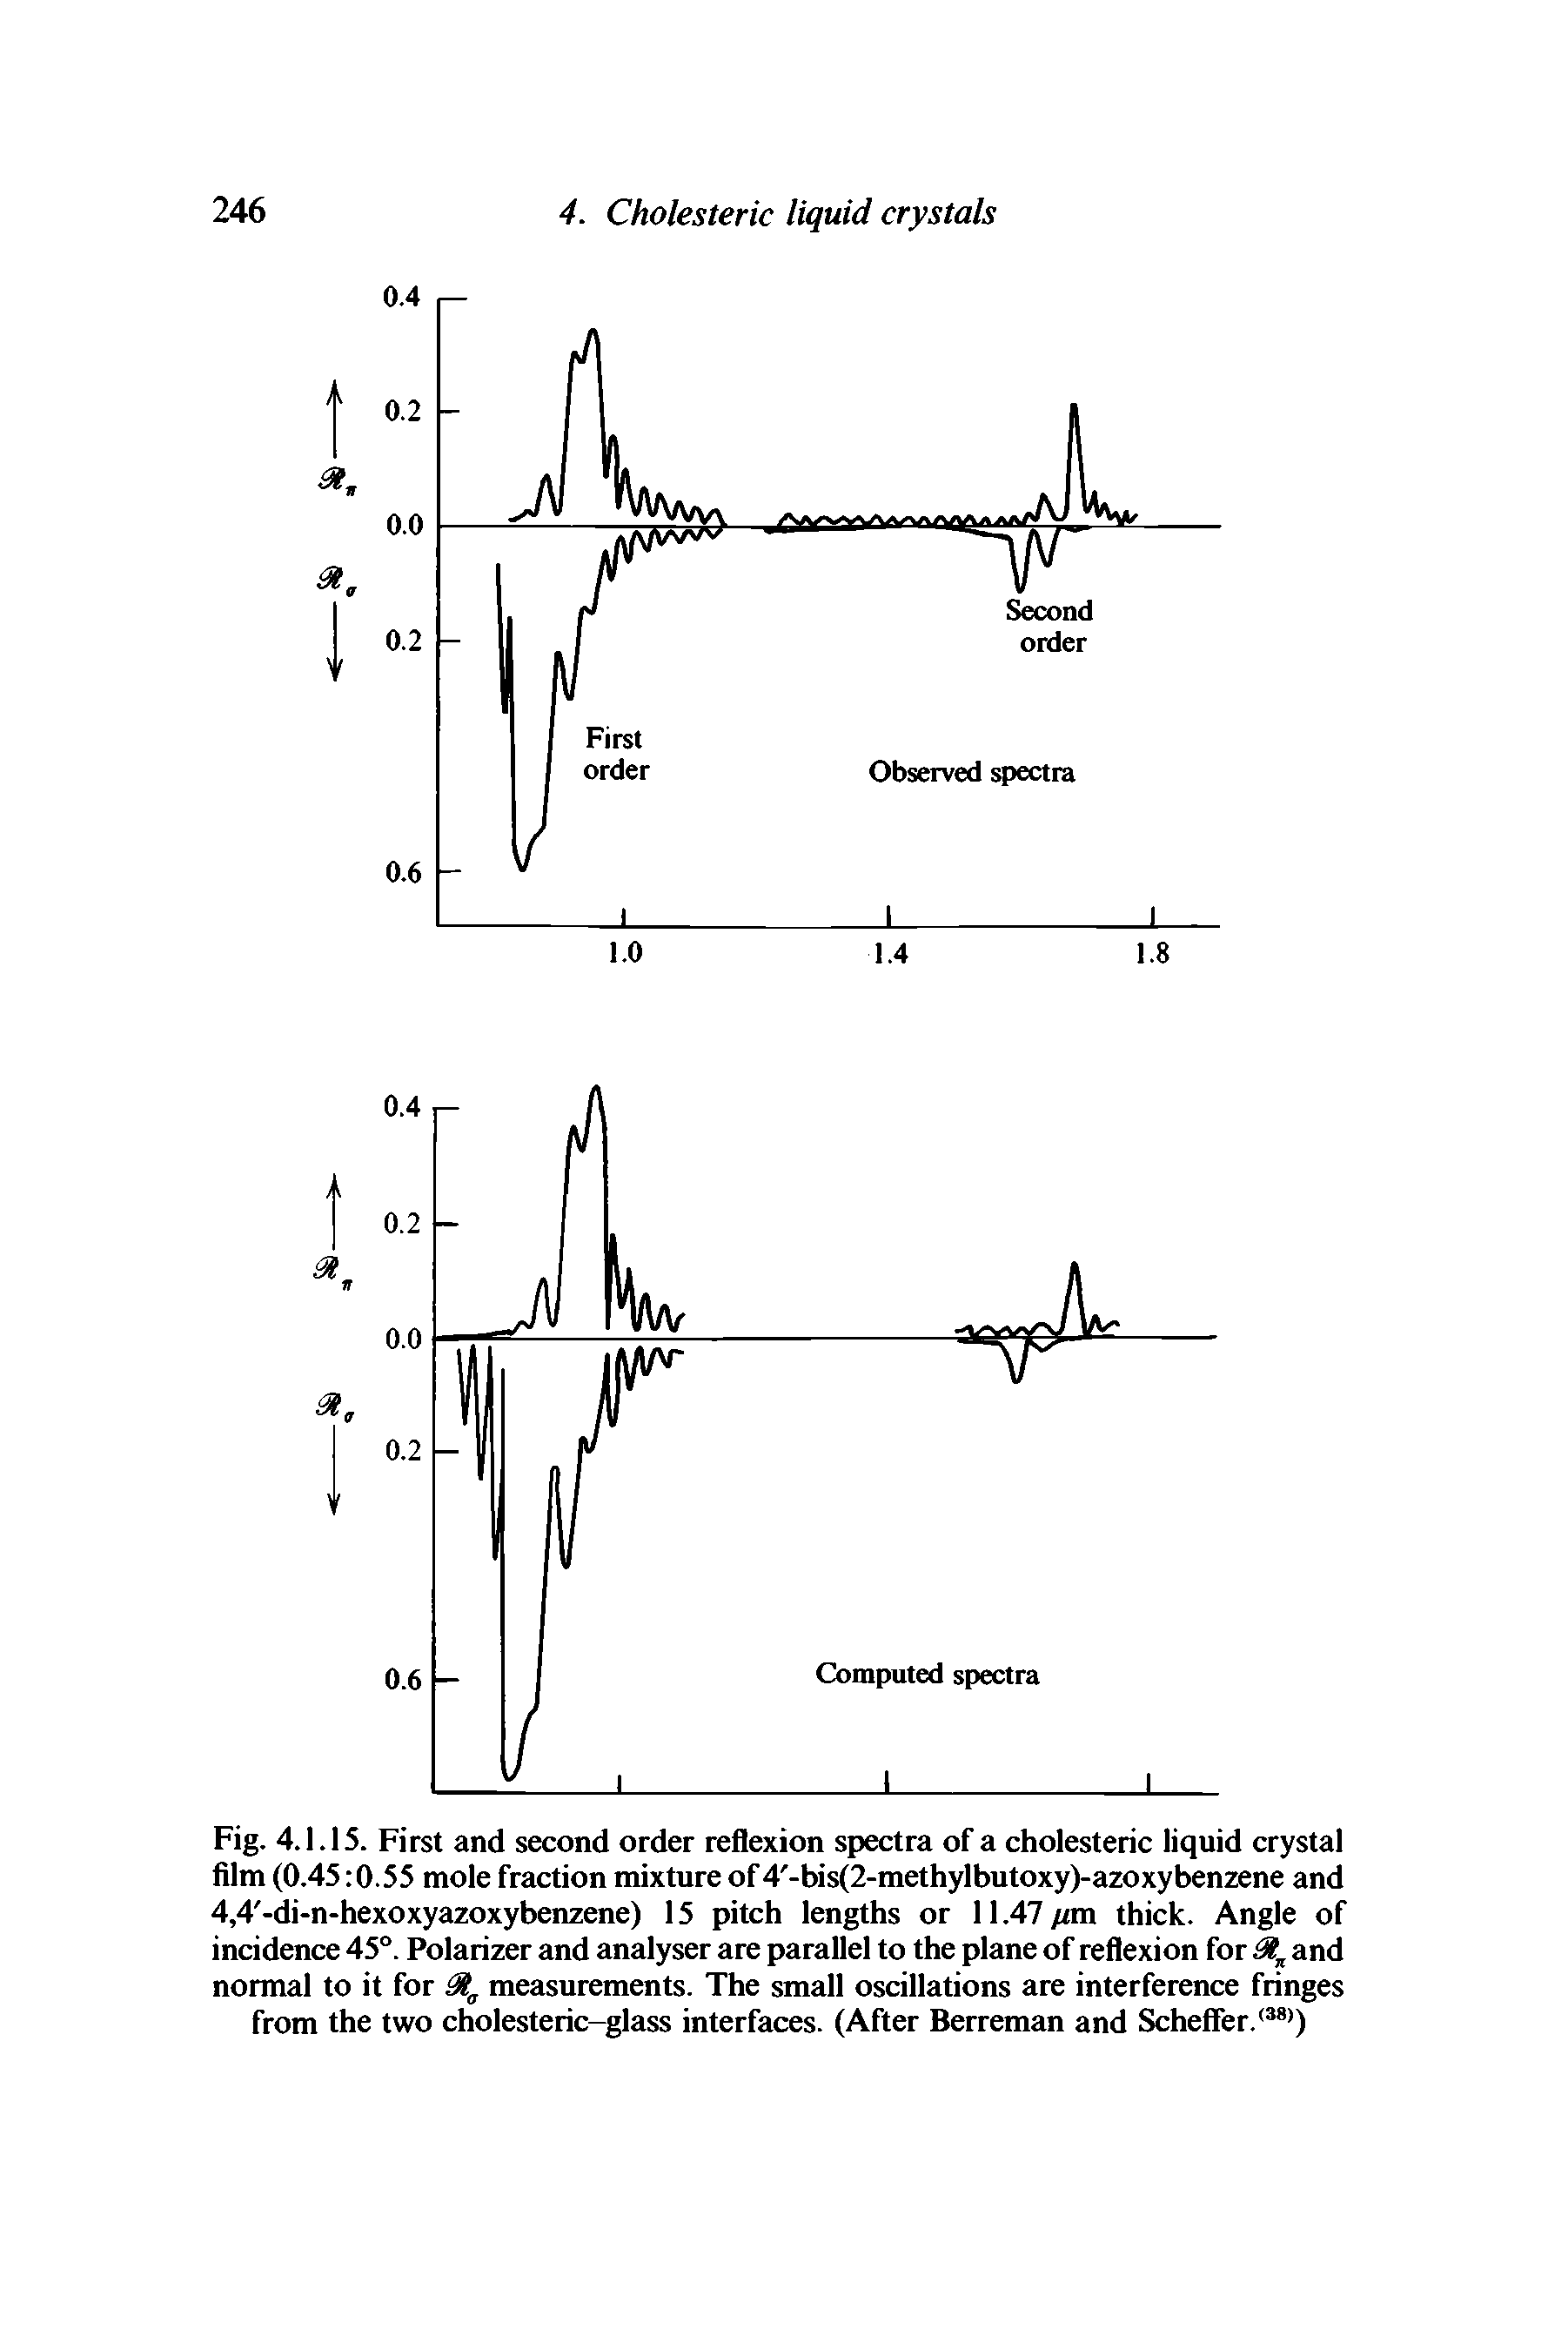 Fig. 4.1.15. First and second order reflexion spectra of a cholesteric liquid crystal film (0.45 0.55 mole fraction mixture of 4 -bis(2-methylbutoxy)-azoxybenzene and 4,4 -di-n-hexoxyazoxybenzene) 15 pitch lengths or 11.47 on thick. Angle of incidence 45°. Polarizer and analyser are parallel to the plane of reflexion for and normal to it for measurements. The small oscillations are interference fringes from the two cholesteric-glass interfaces. (After Berreman and Scheffer. )...